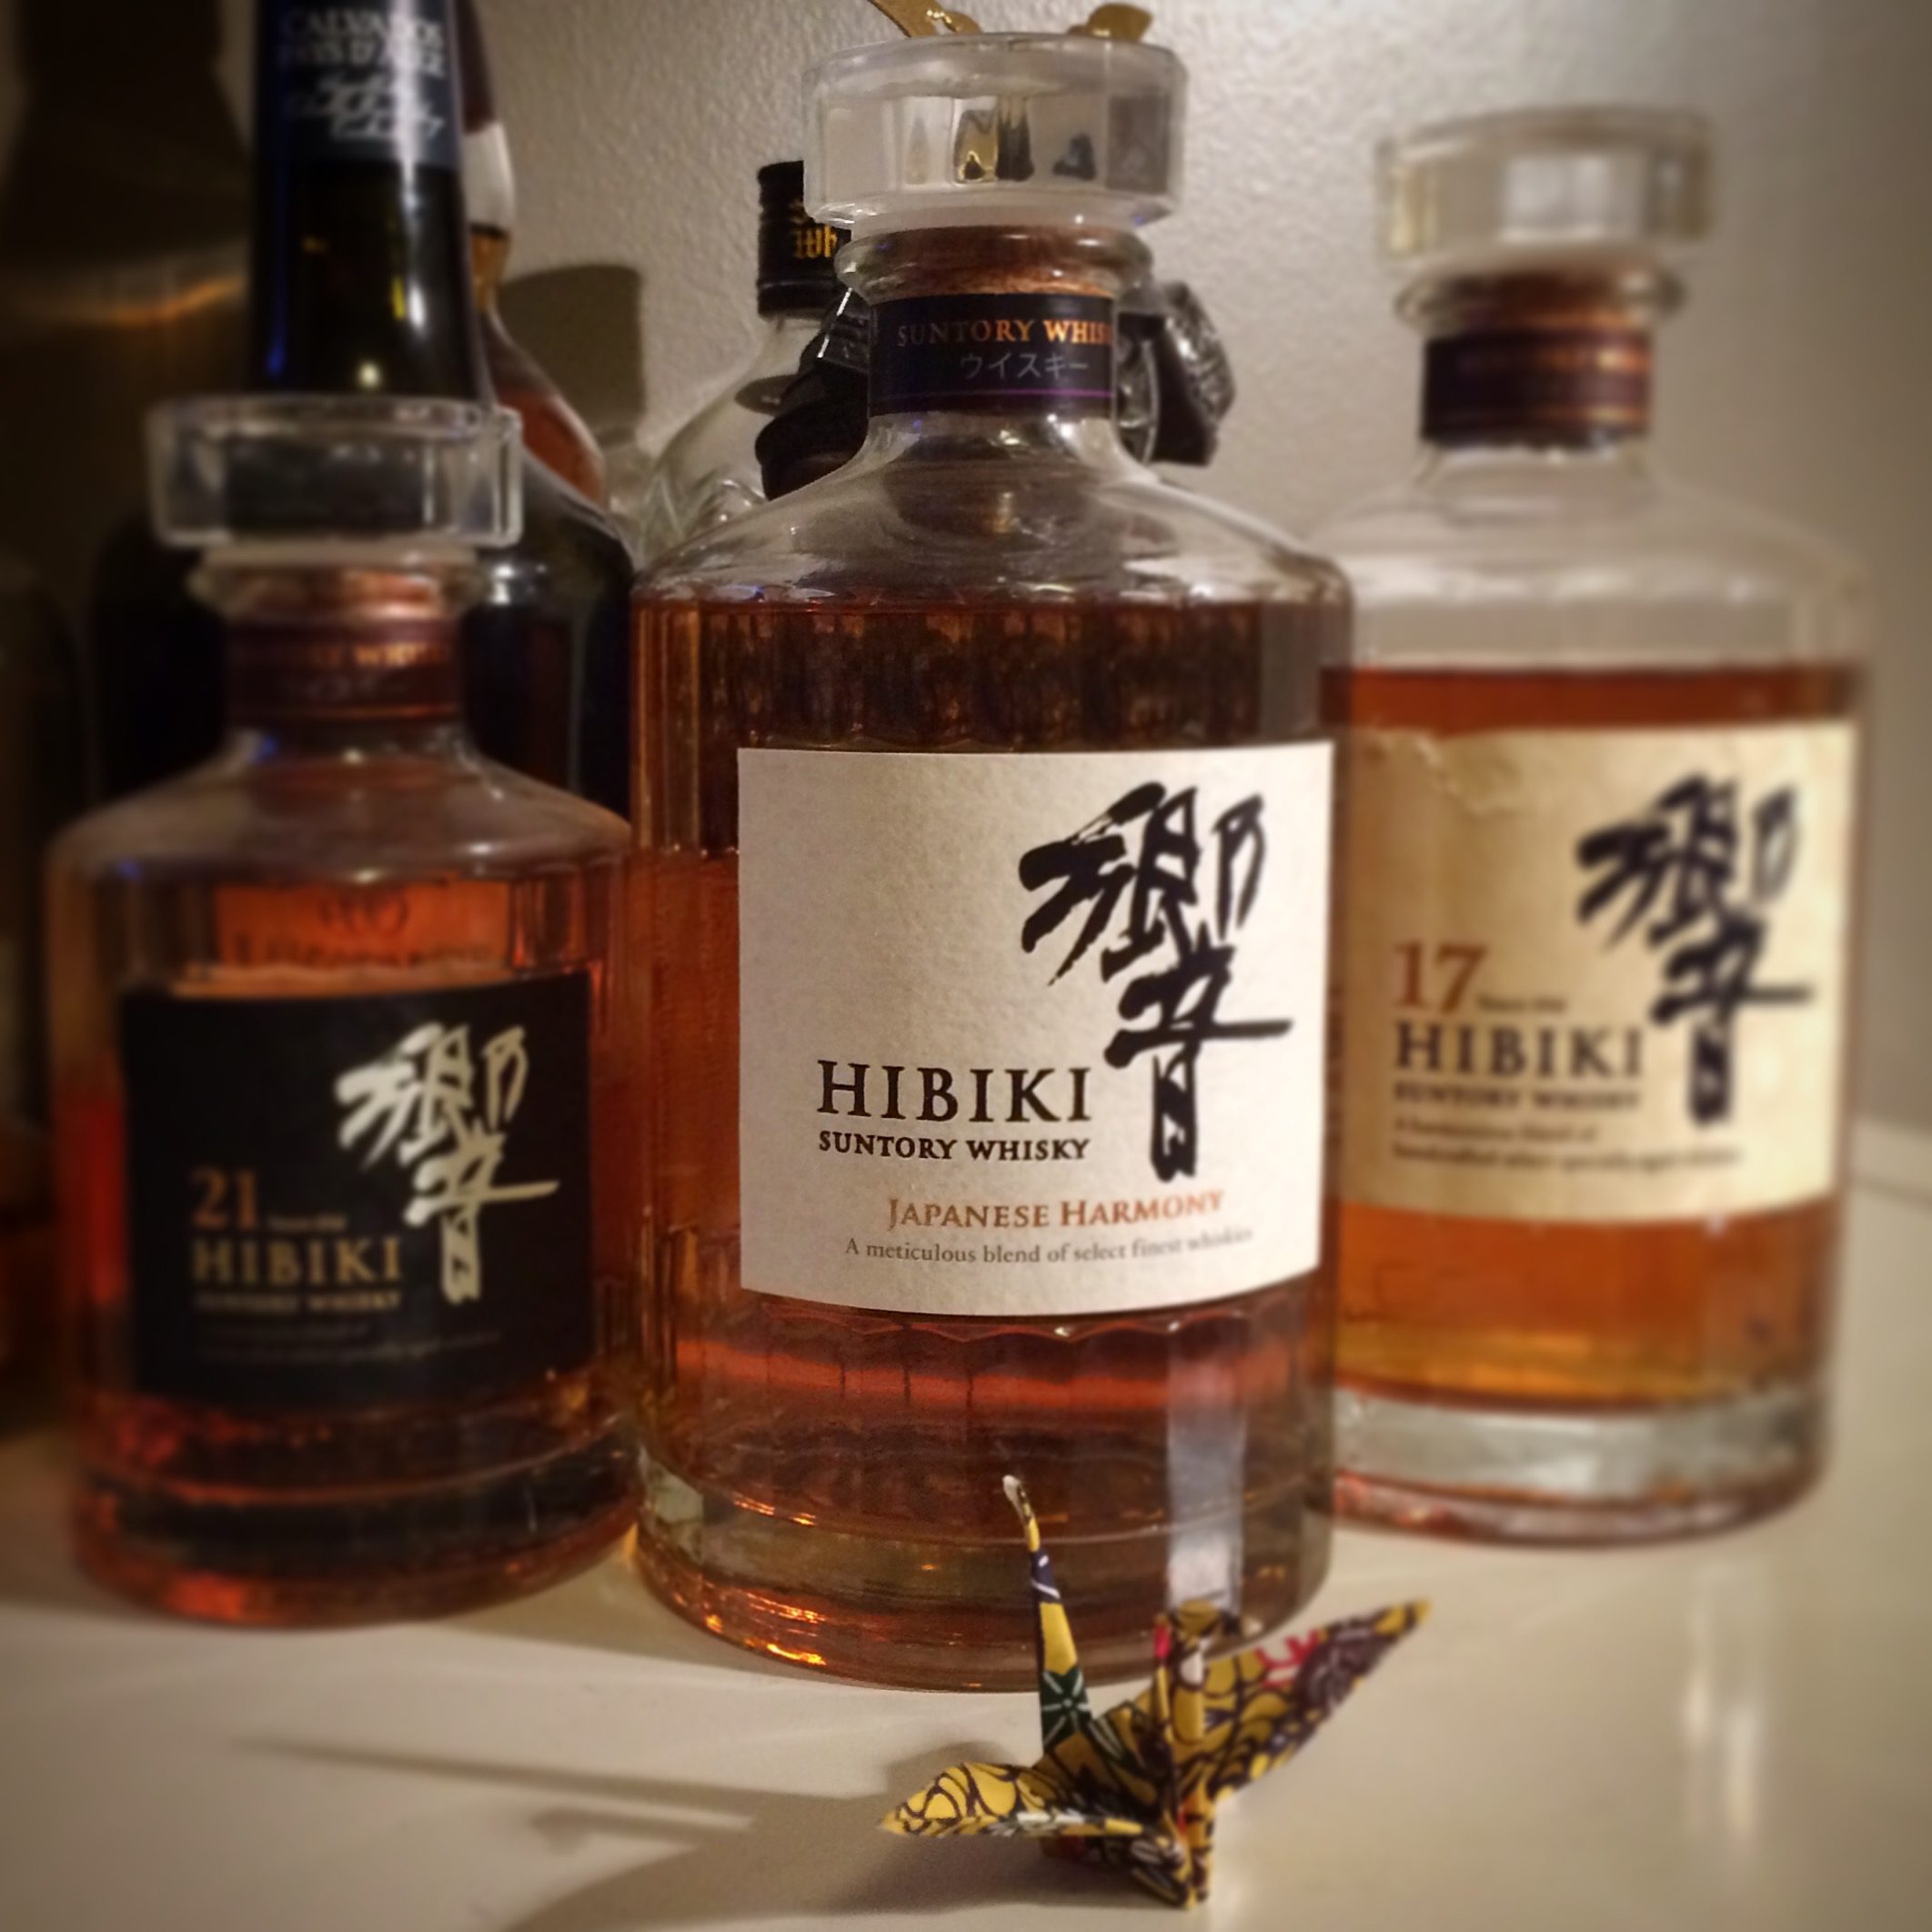 Featured image for “What constitutes authentic Japanese whisky”